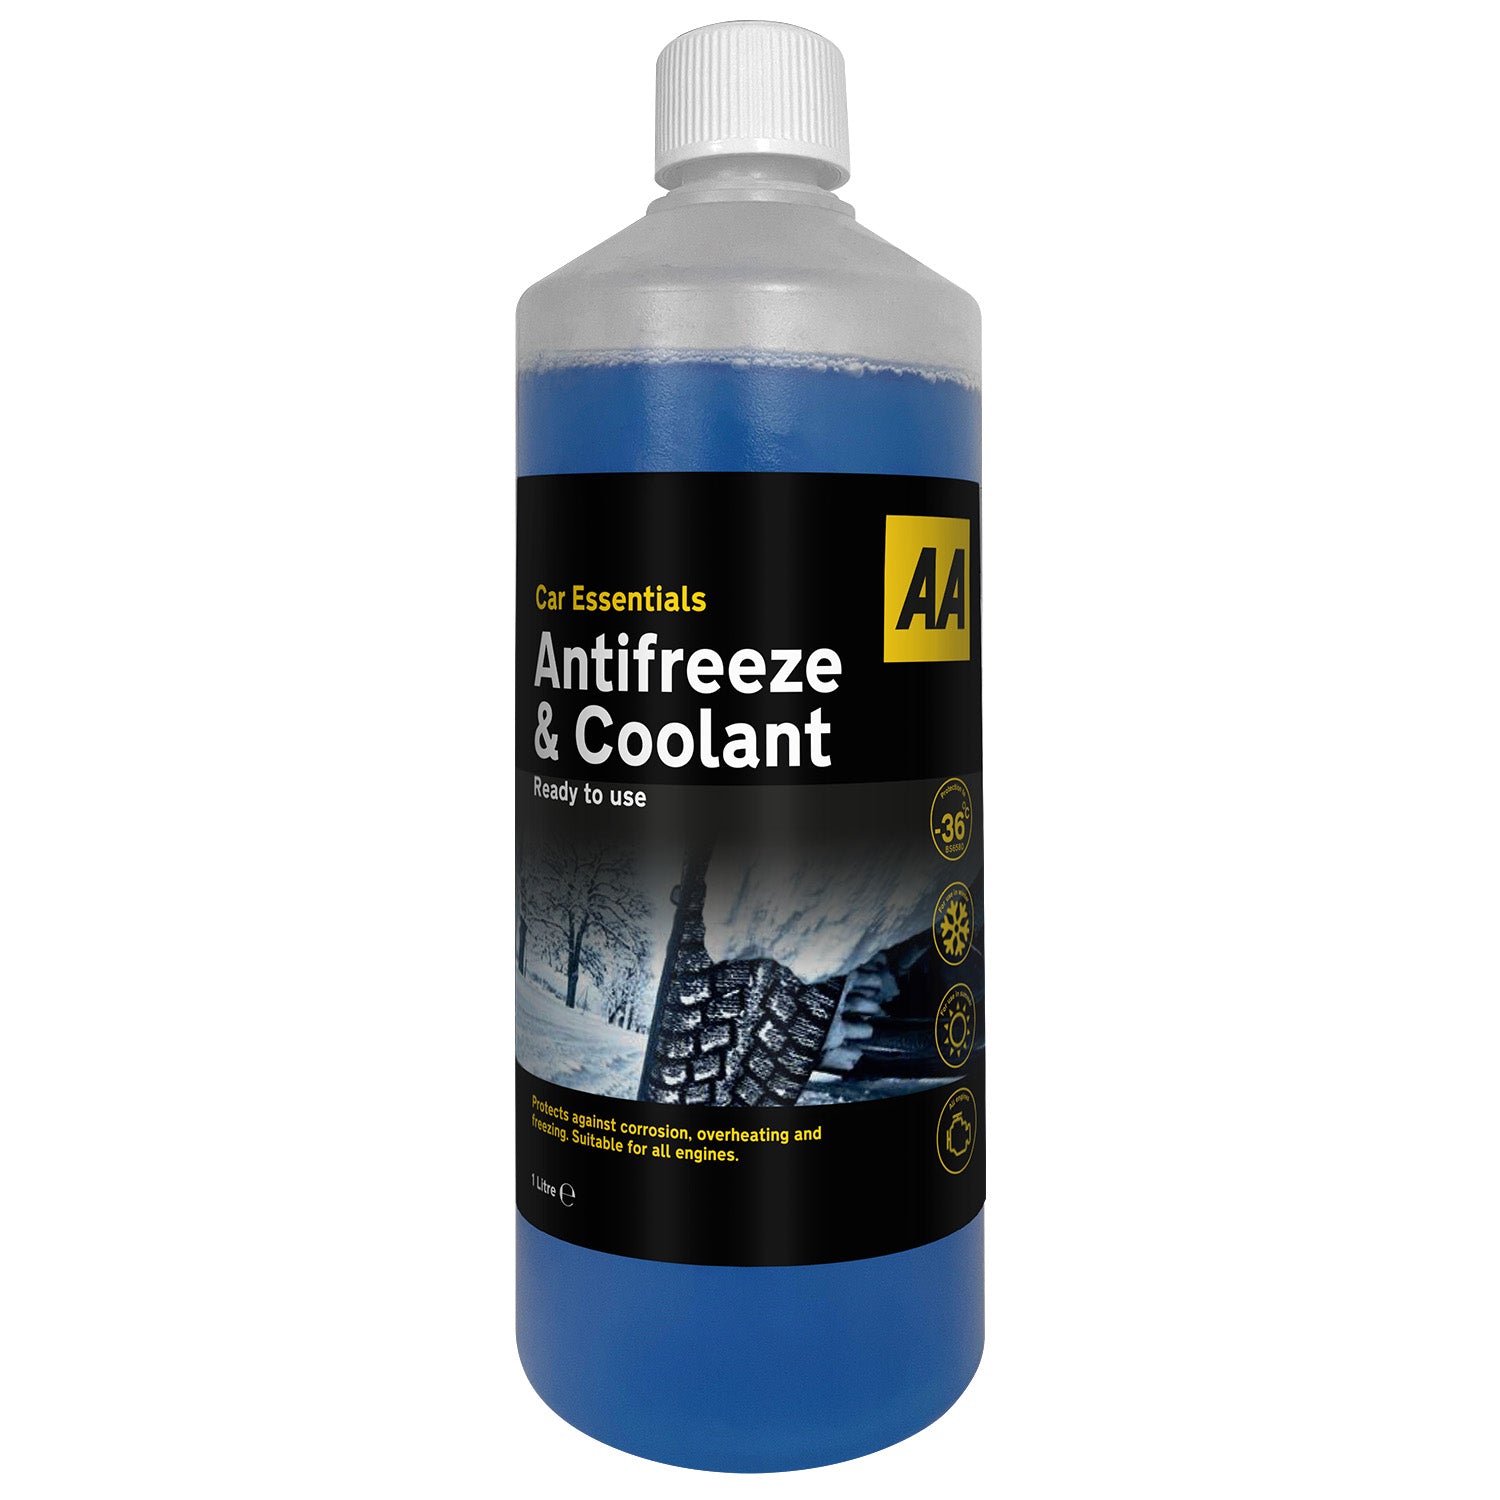 AA Antifreeze and Coolant 1 Litre -36°C with 5L Winter Screenwash